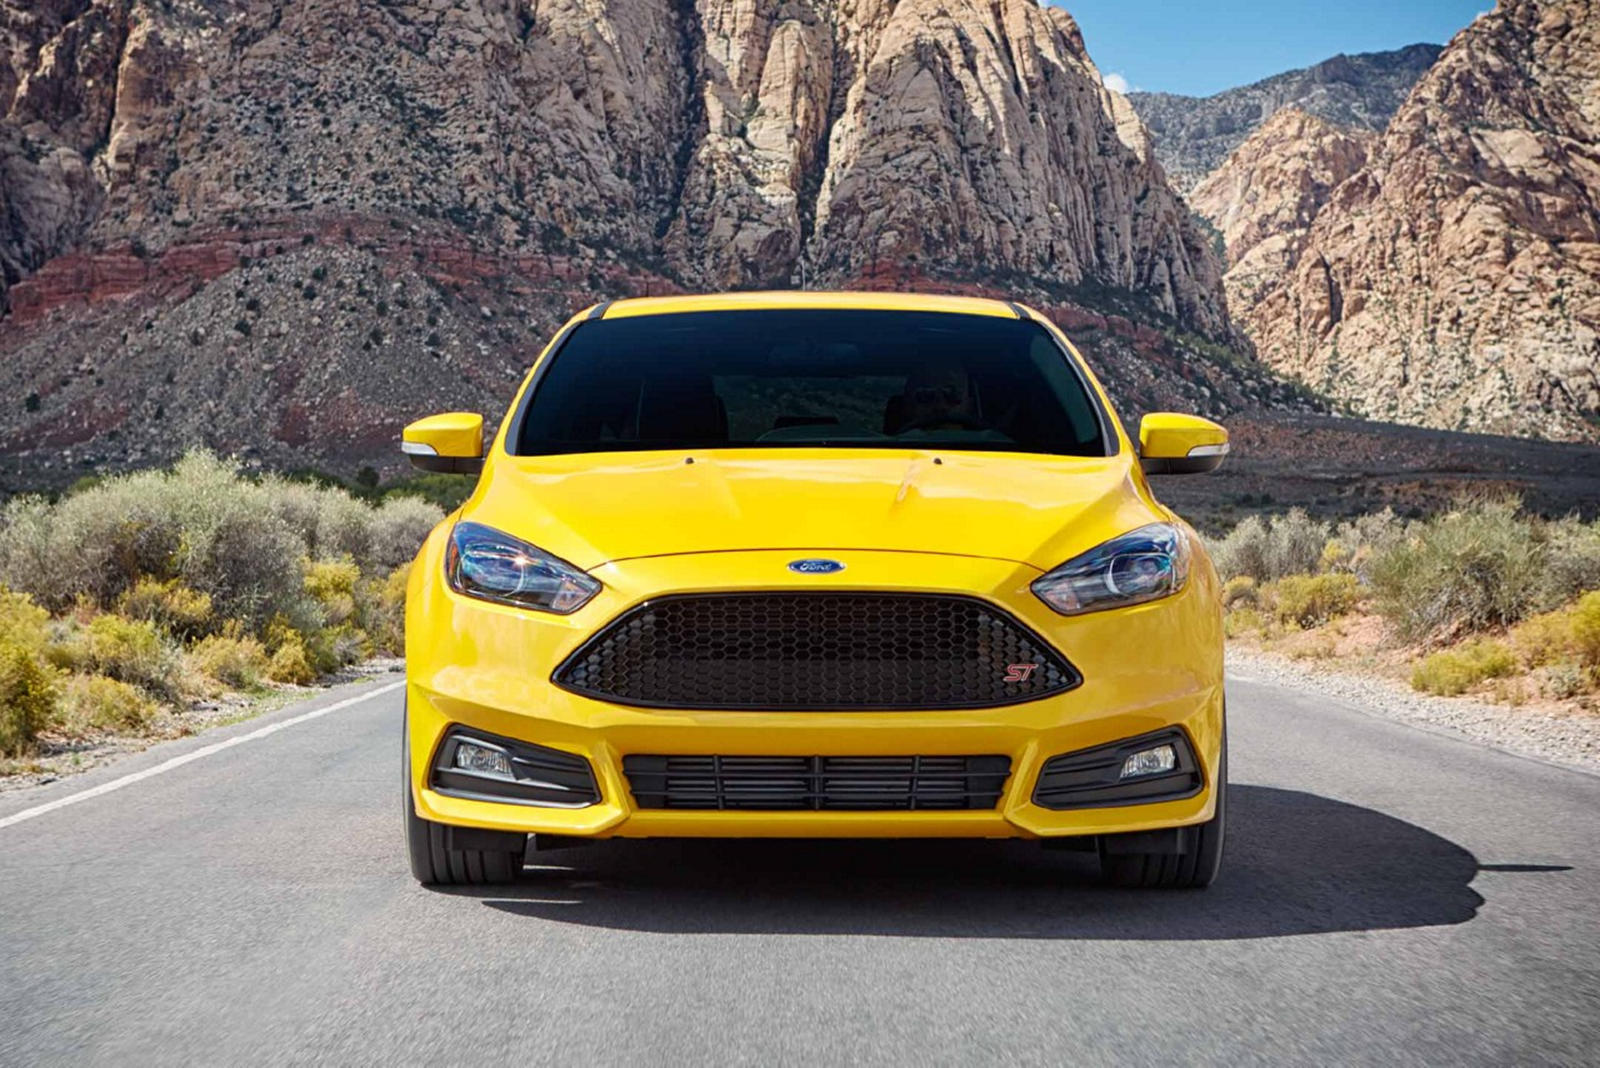 18 Ford Focus St Review Trims Specs Price New Interior Features Exterior Design And Specifications Carbuzz